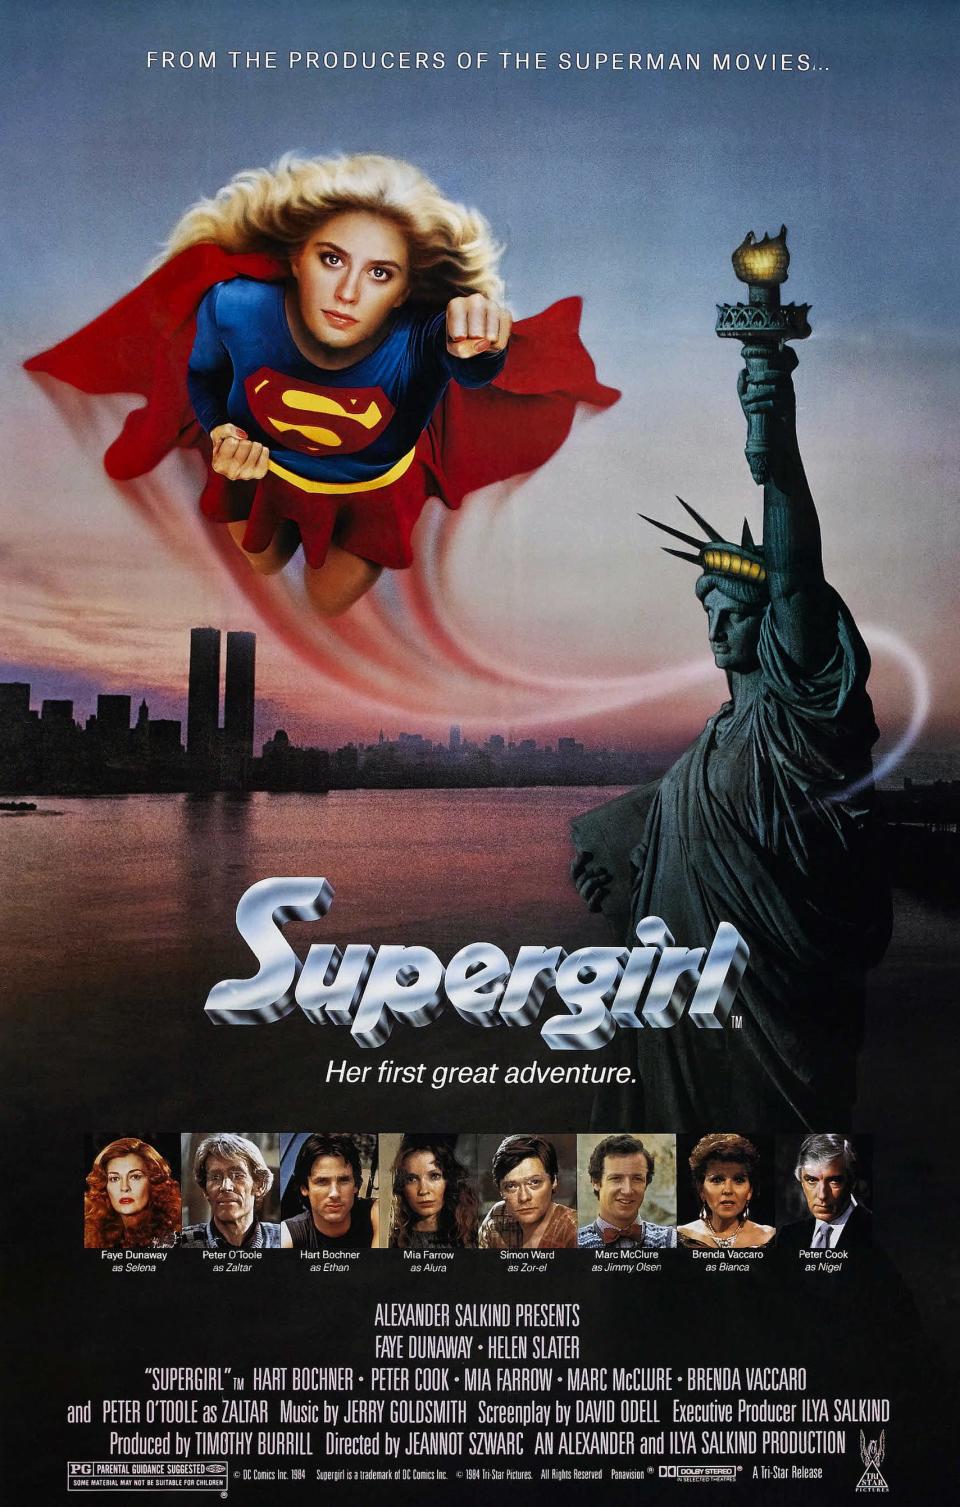 Helen Slater played an amazing Supergirl, and she's come back to the Superman universe more than once in similar roles. Slater also played Clark Kent's biological mother in Smallville, as well as Supergirl's adoptive mom in the 2015 TV show, Supergirl. But even though Slater is the main focus of this poster, she's not the source of its design flaw. No, it's the other lady that's causing the trouble. See the Statue of Liberty? Her torch is still lighting the path to liberty, just like the real-life counterpart. The actual Statue of Liberty holds the torch with her right hand. But in an alternate universe (the same one that Supergirl exists in, apparently), Lady Liberty is left-handed. 